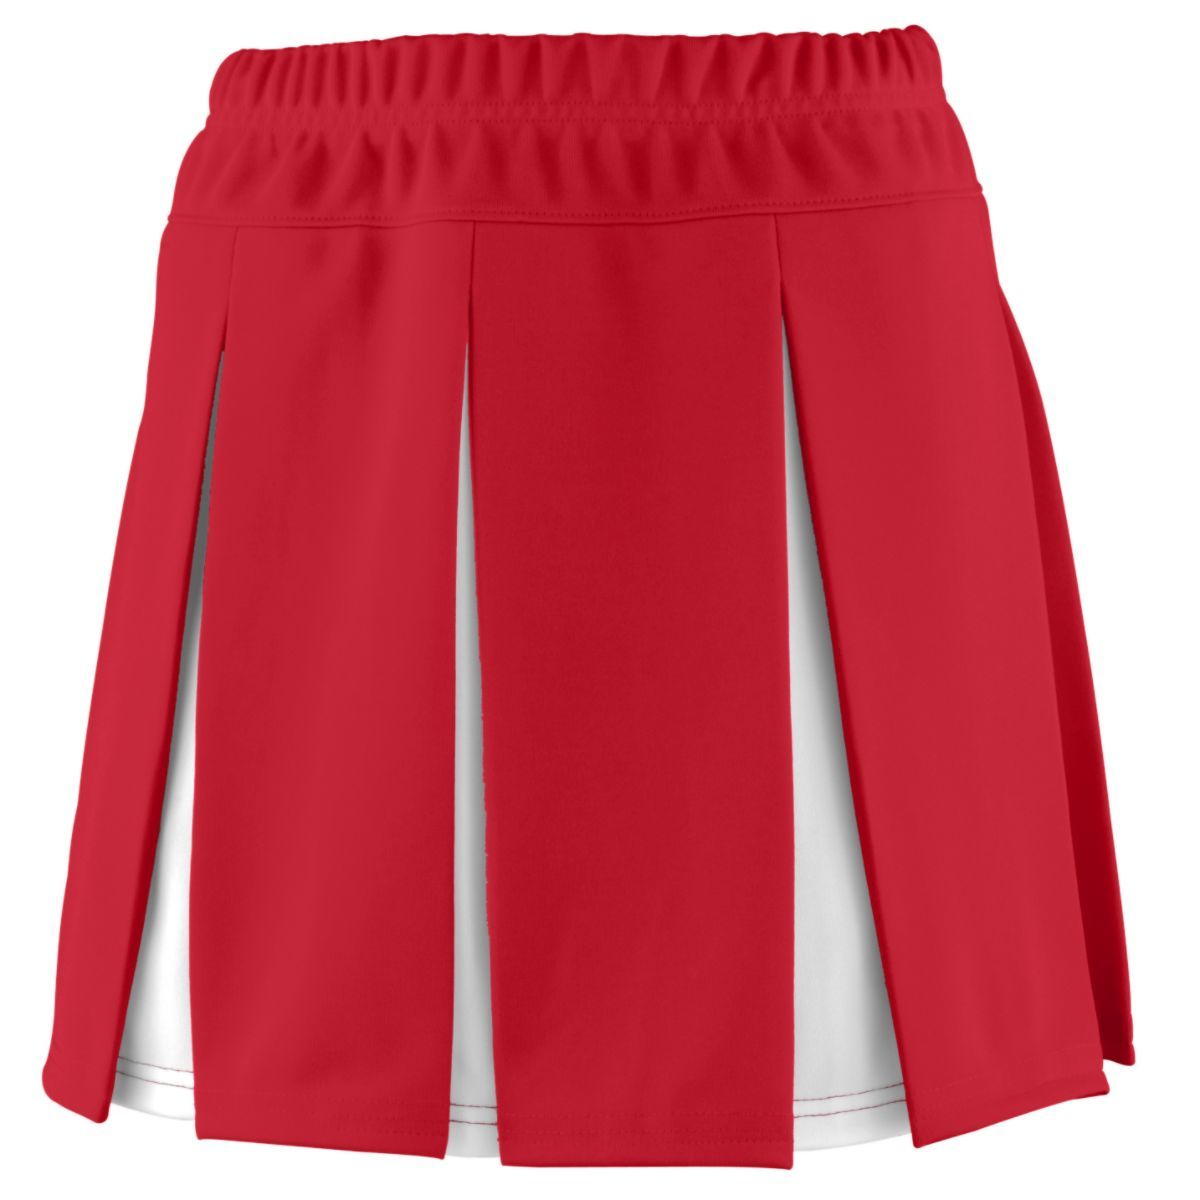 Augusta Sportswear Girls Liberty Skirt in Red/White  -Part of the Girls, Augusta-Products, Cheer product lines at KanaleyCreations.com